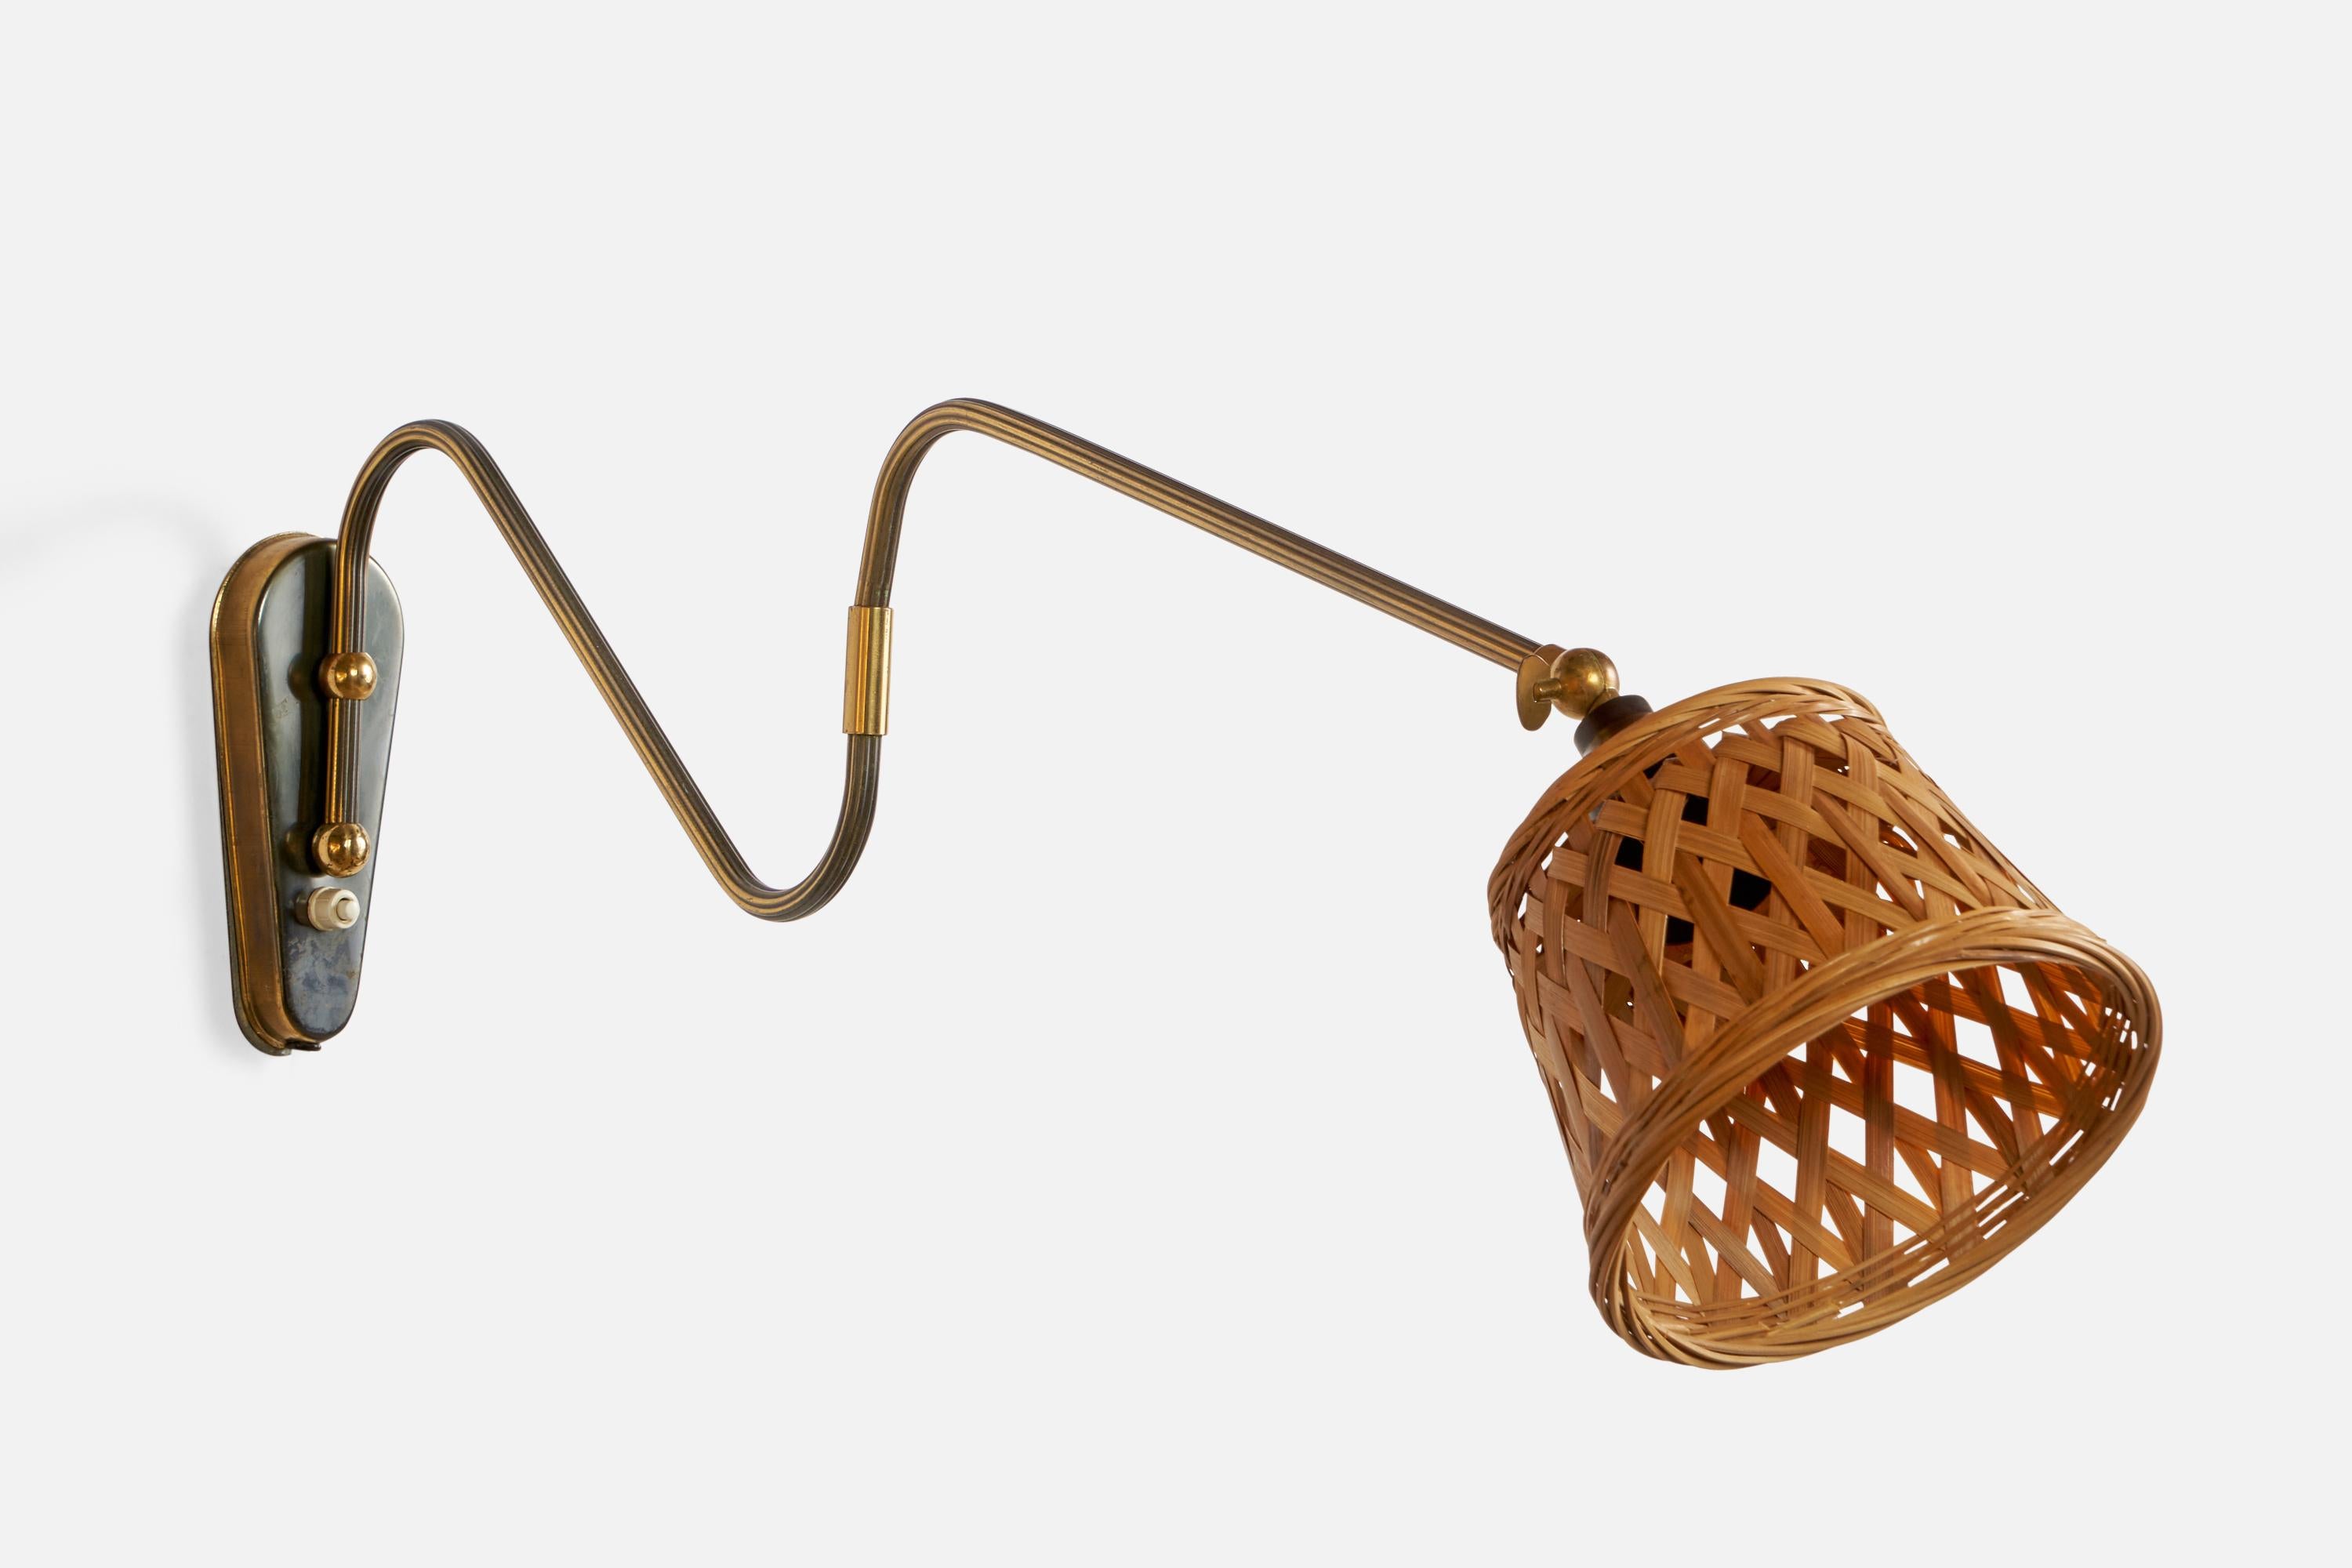 An adjustable brass and rattan wall light designed and produced in Denmark, 1940s.

Overall Dimensions (inches): 9.5” H x 6.5” W x 29” D
Back Plate Dimensions (inches): 6” H x 2.5” W x 0.75” D
Bulb Specifications: E-26 Bulb
Number of Sockets: 1
All